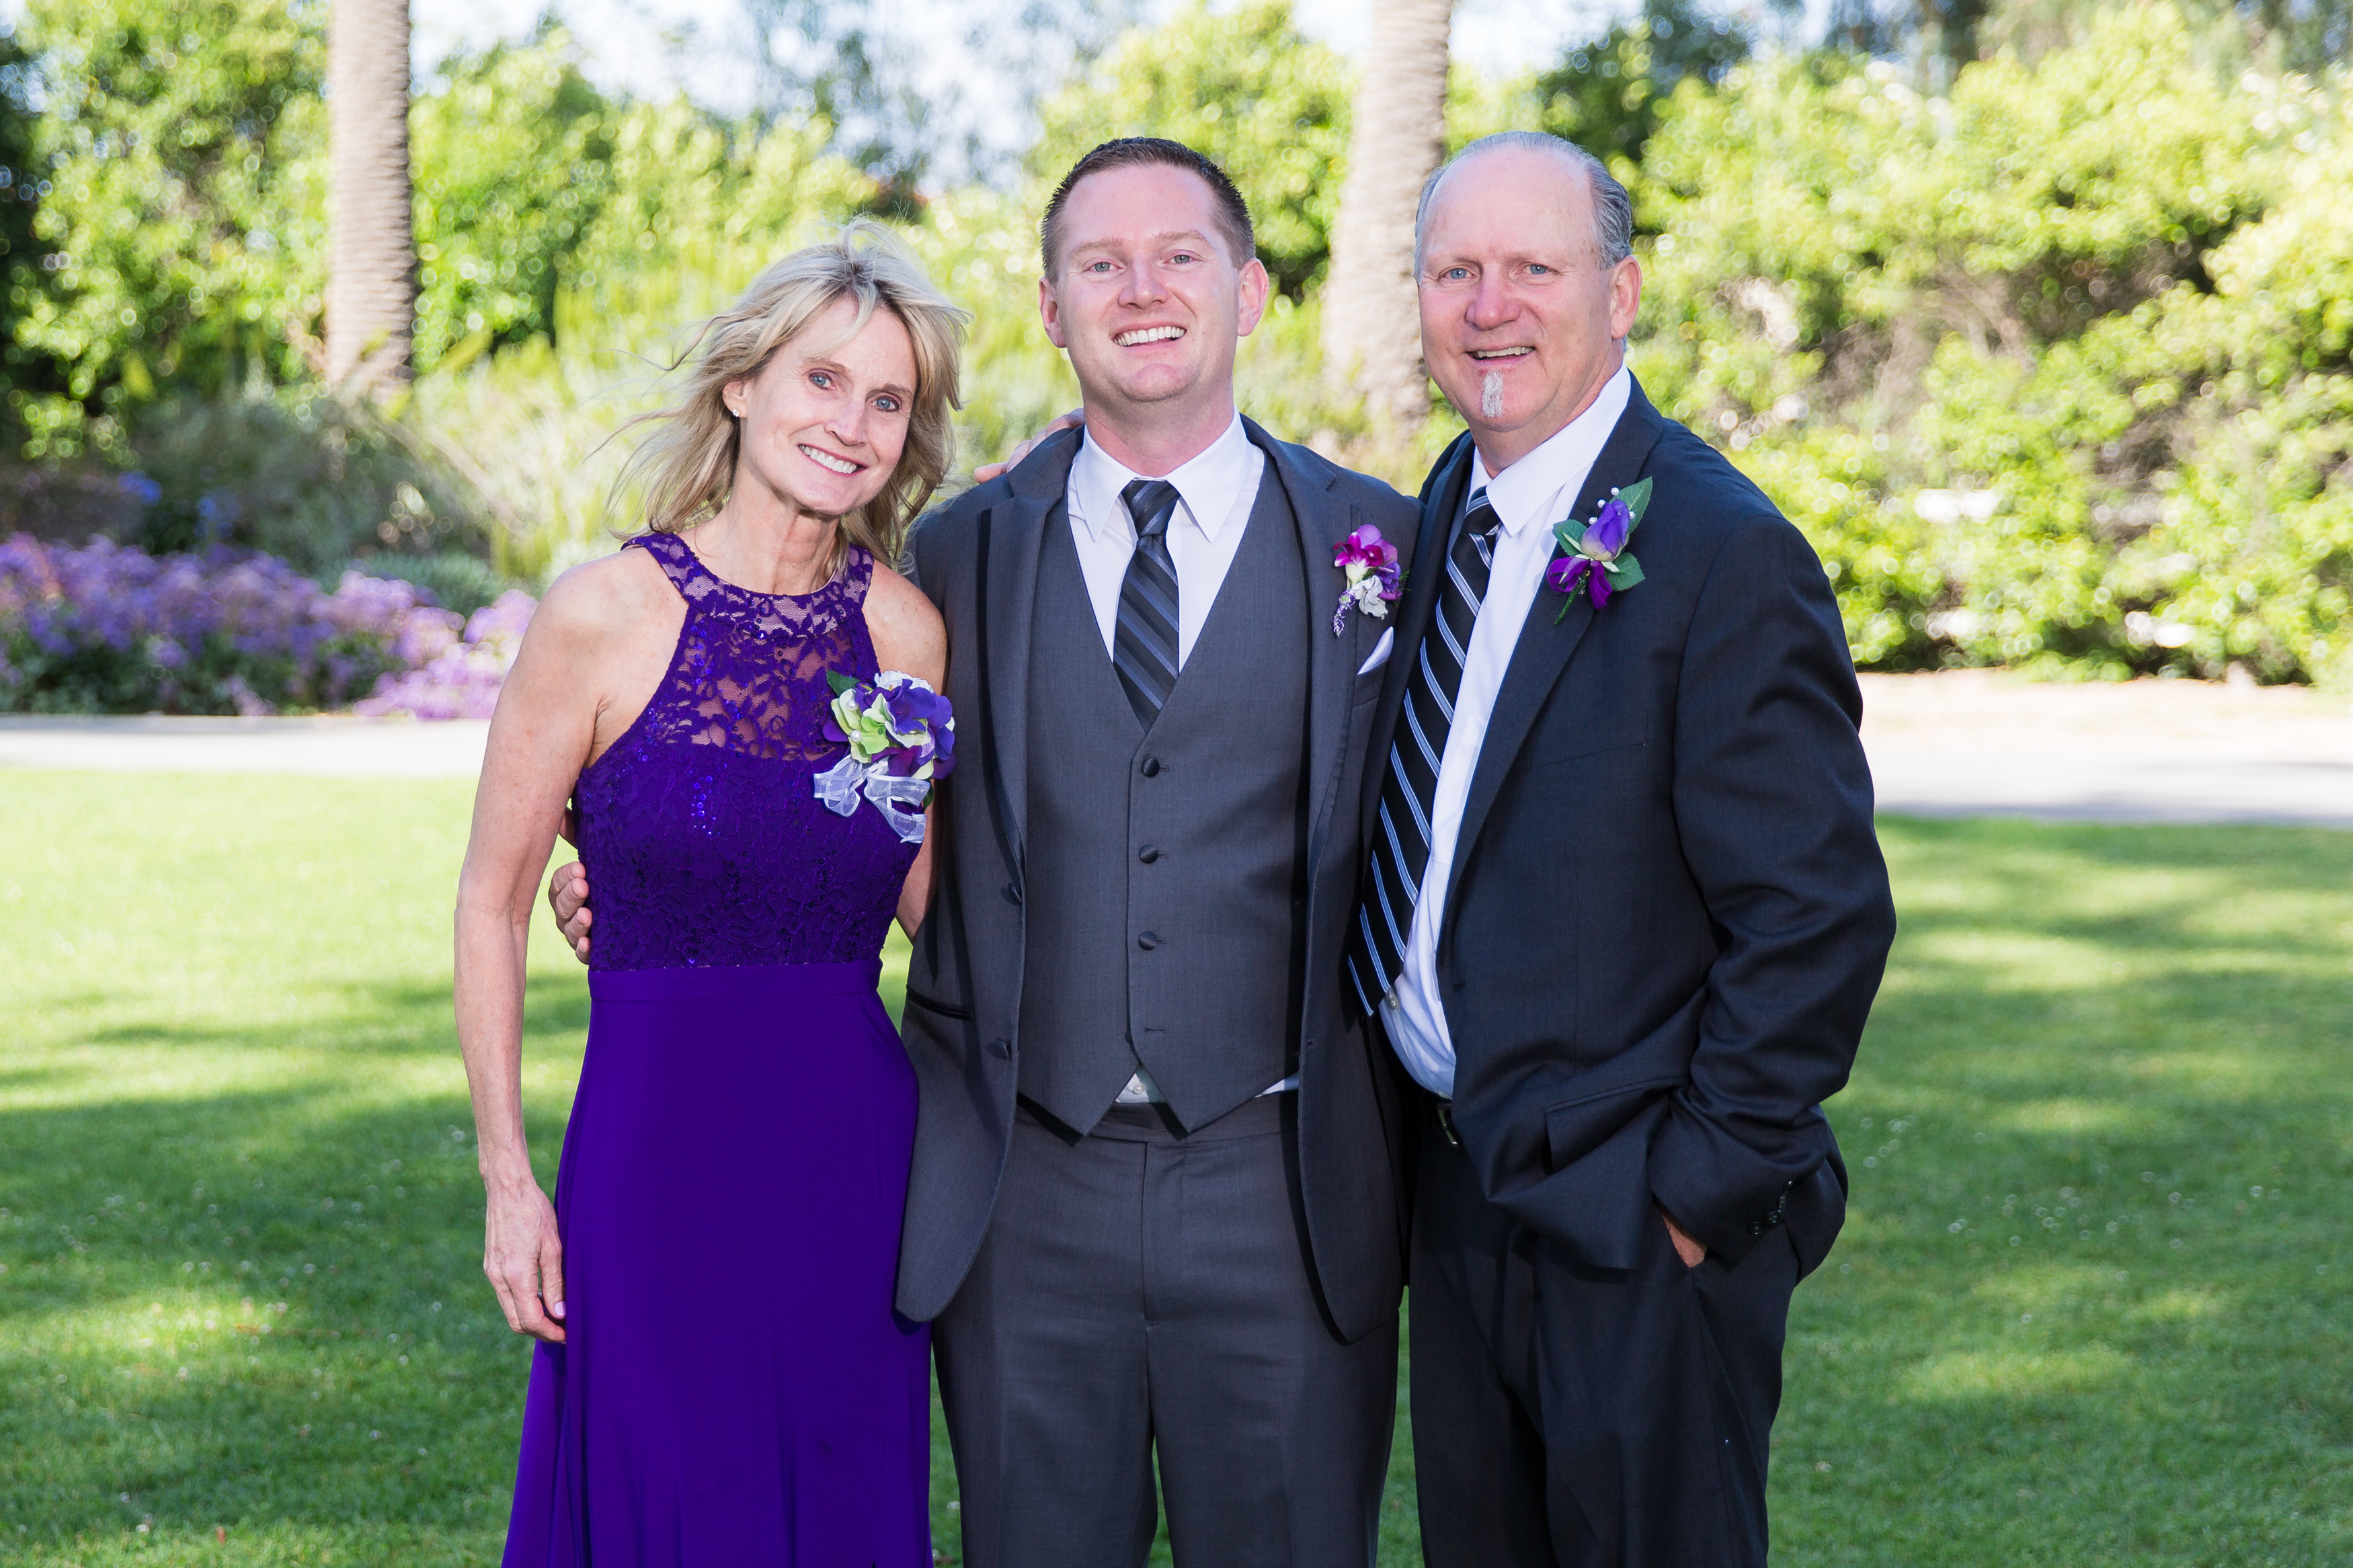 Groom with smiling parents on lawn